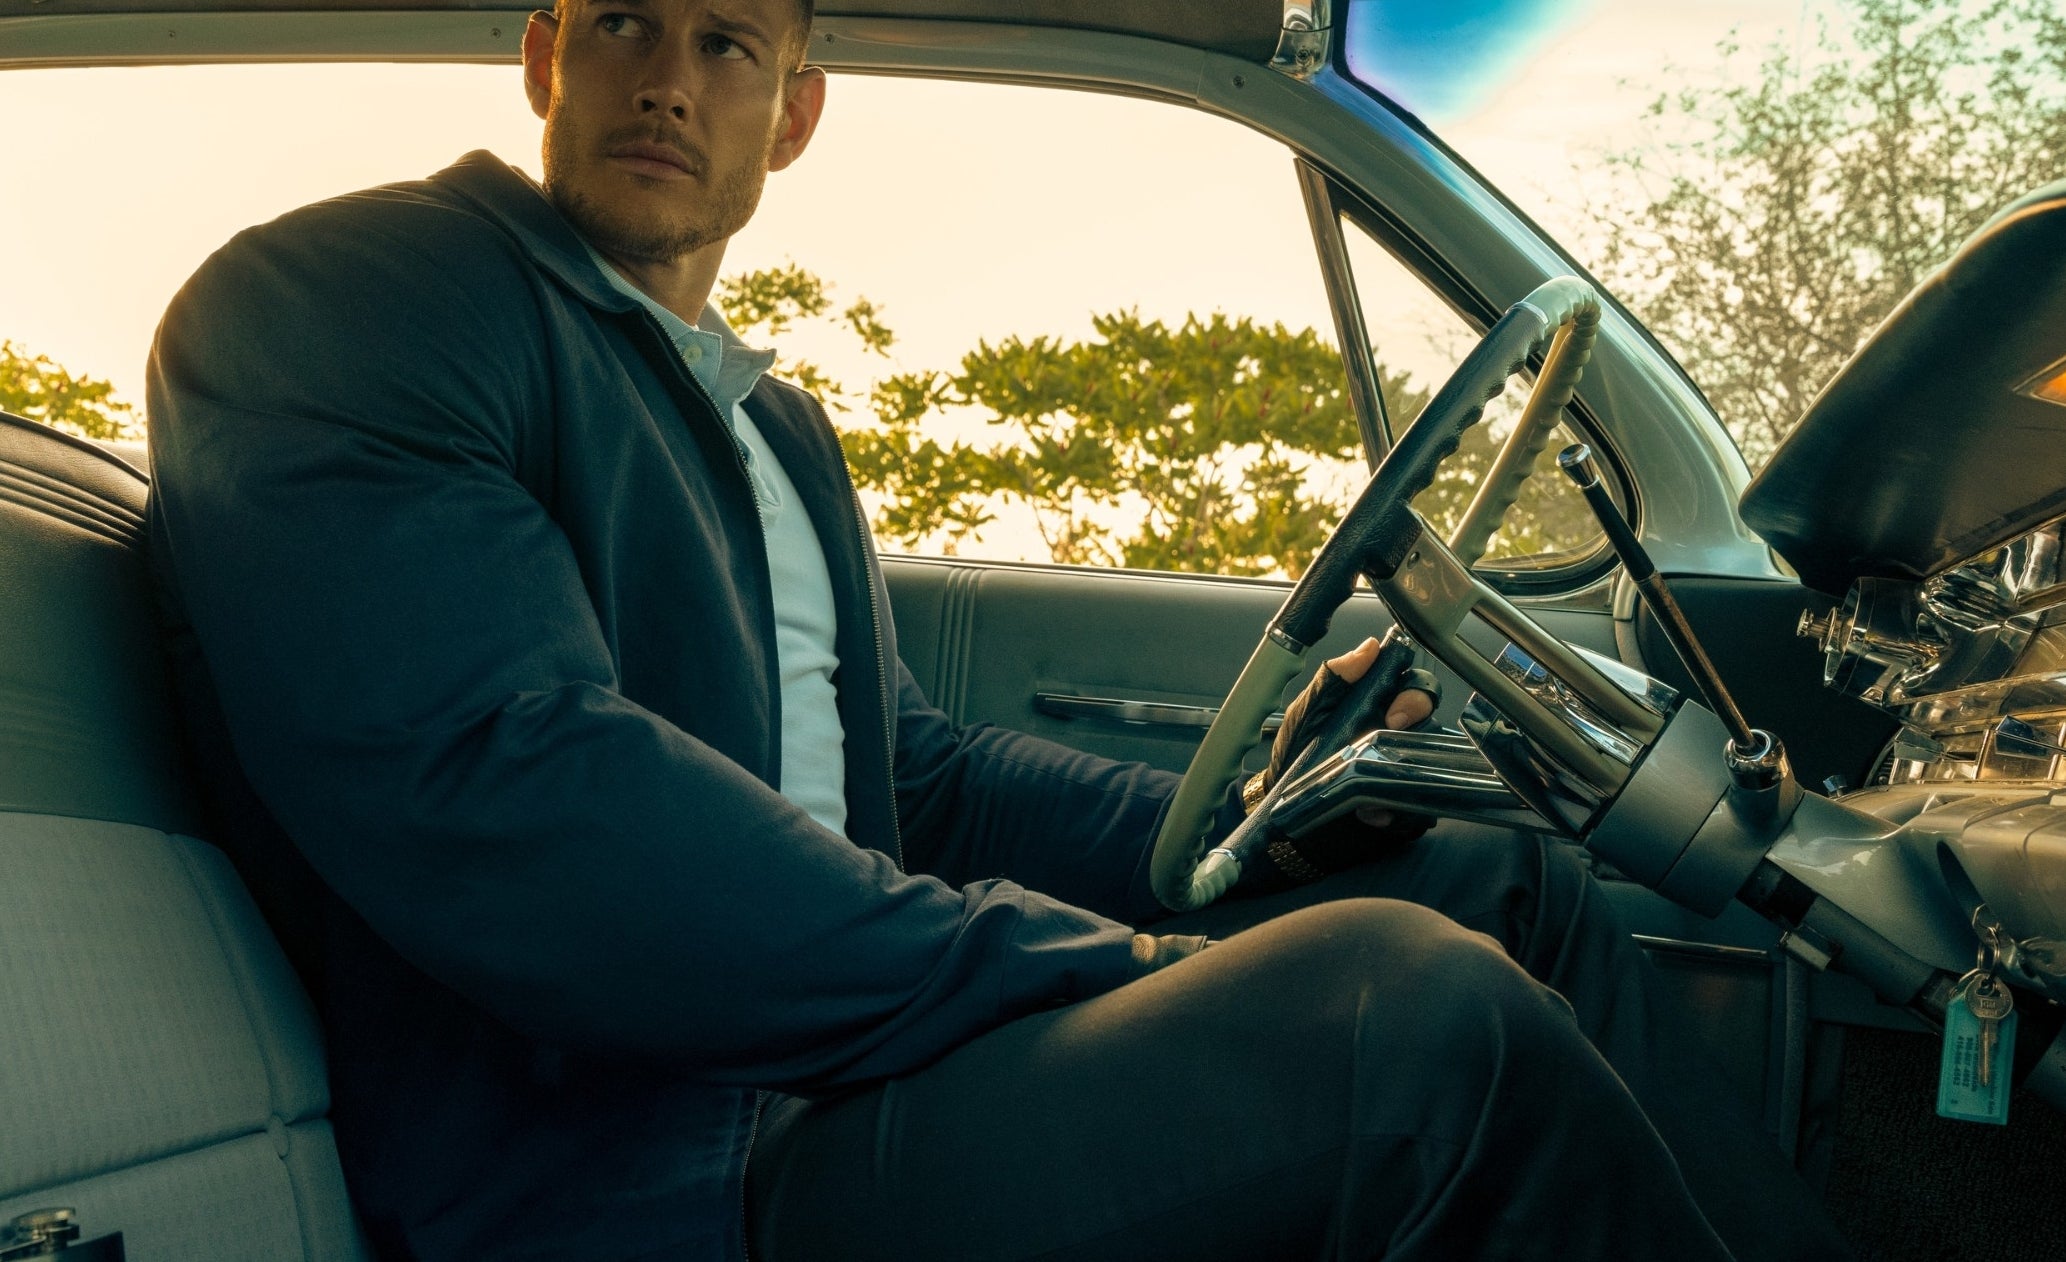 Man in a suit sitting inside a classic car with a stern expression, handgun on the seat beside him